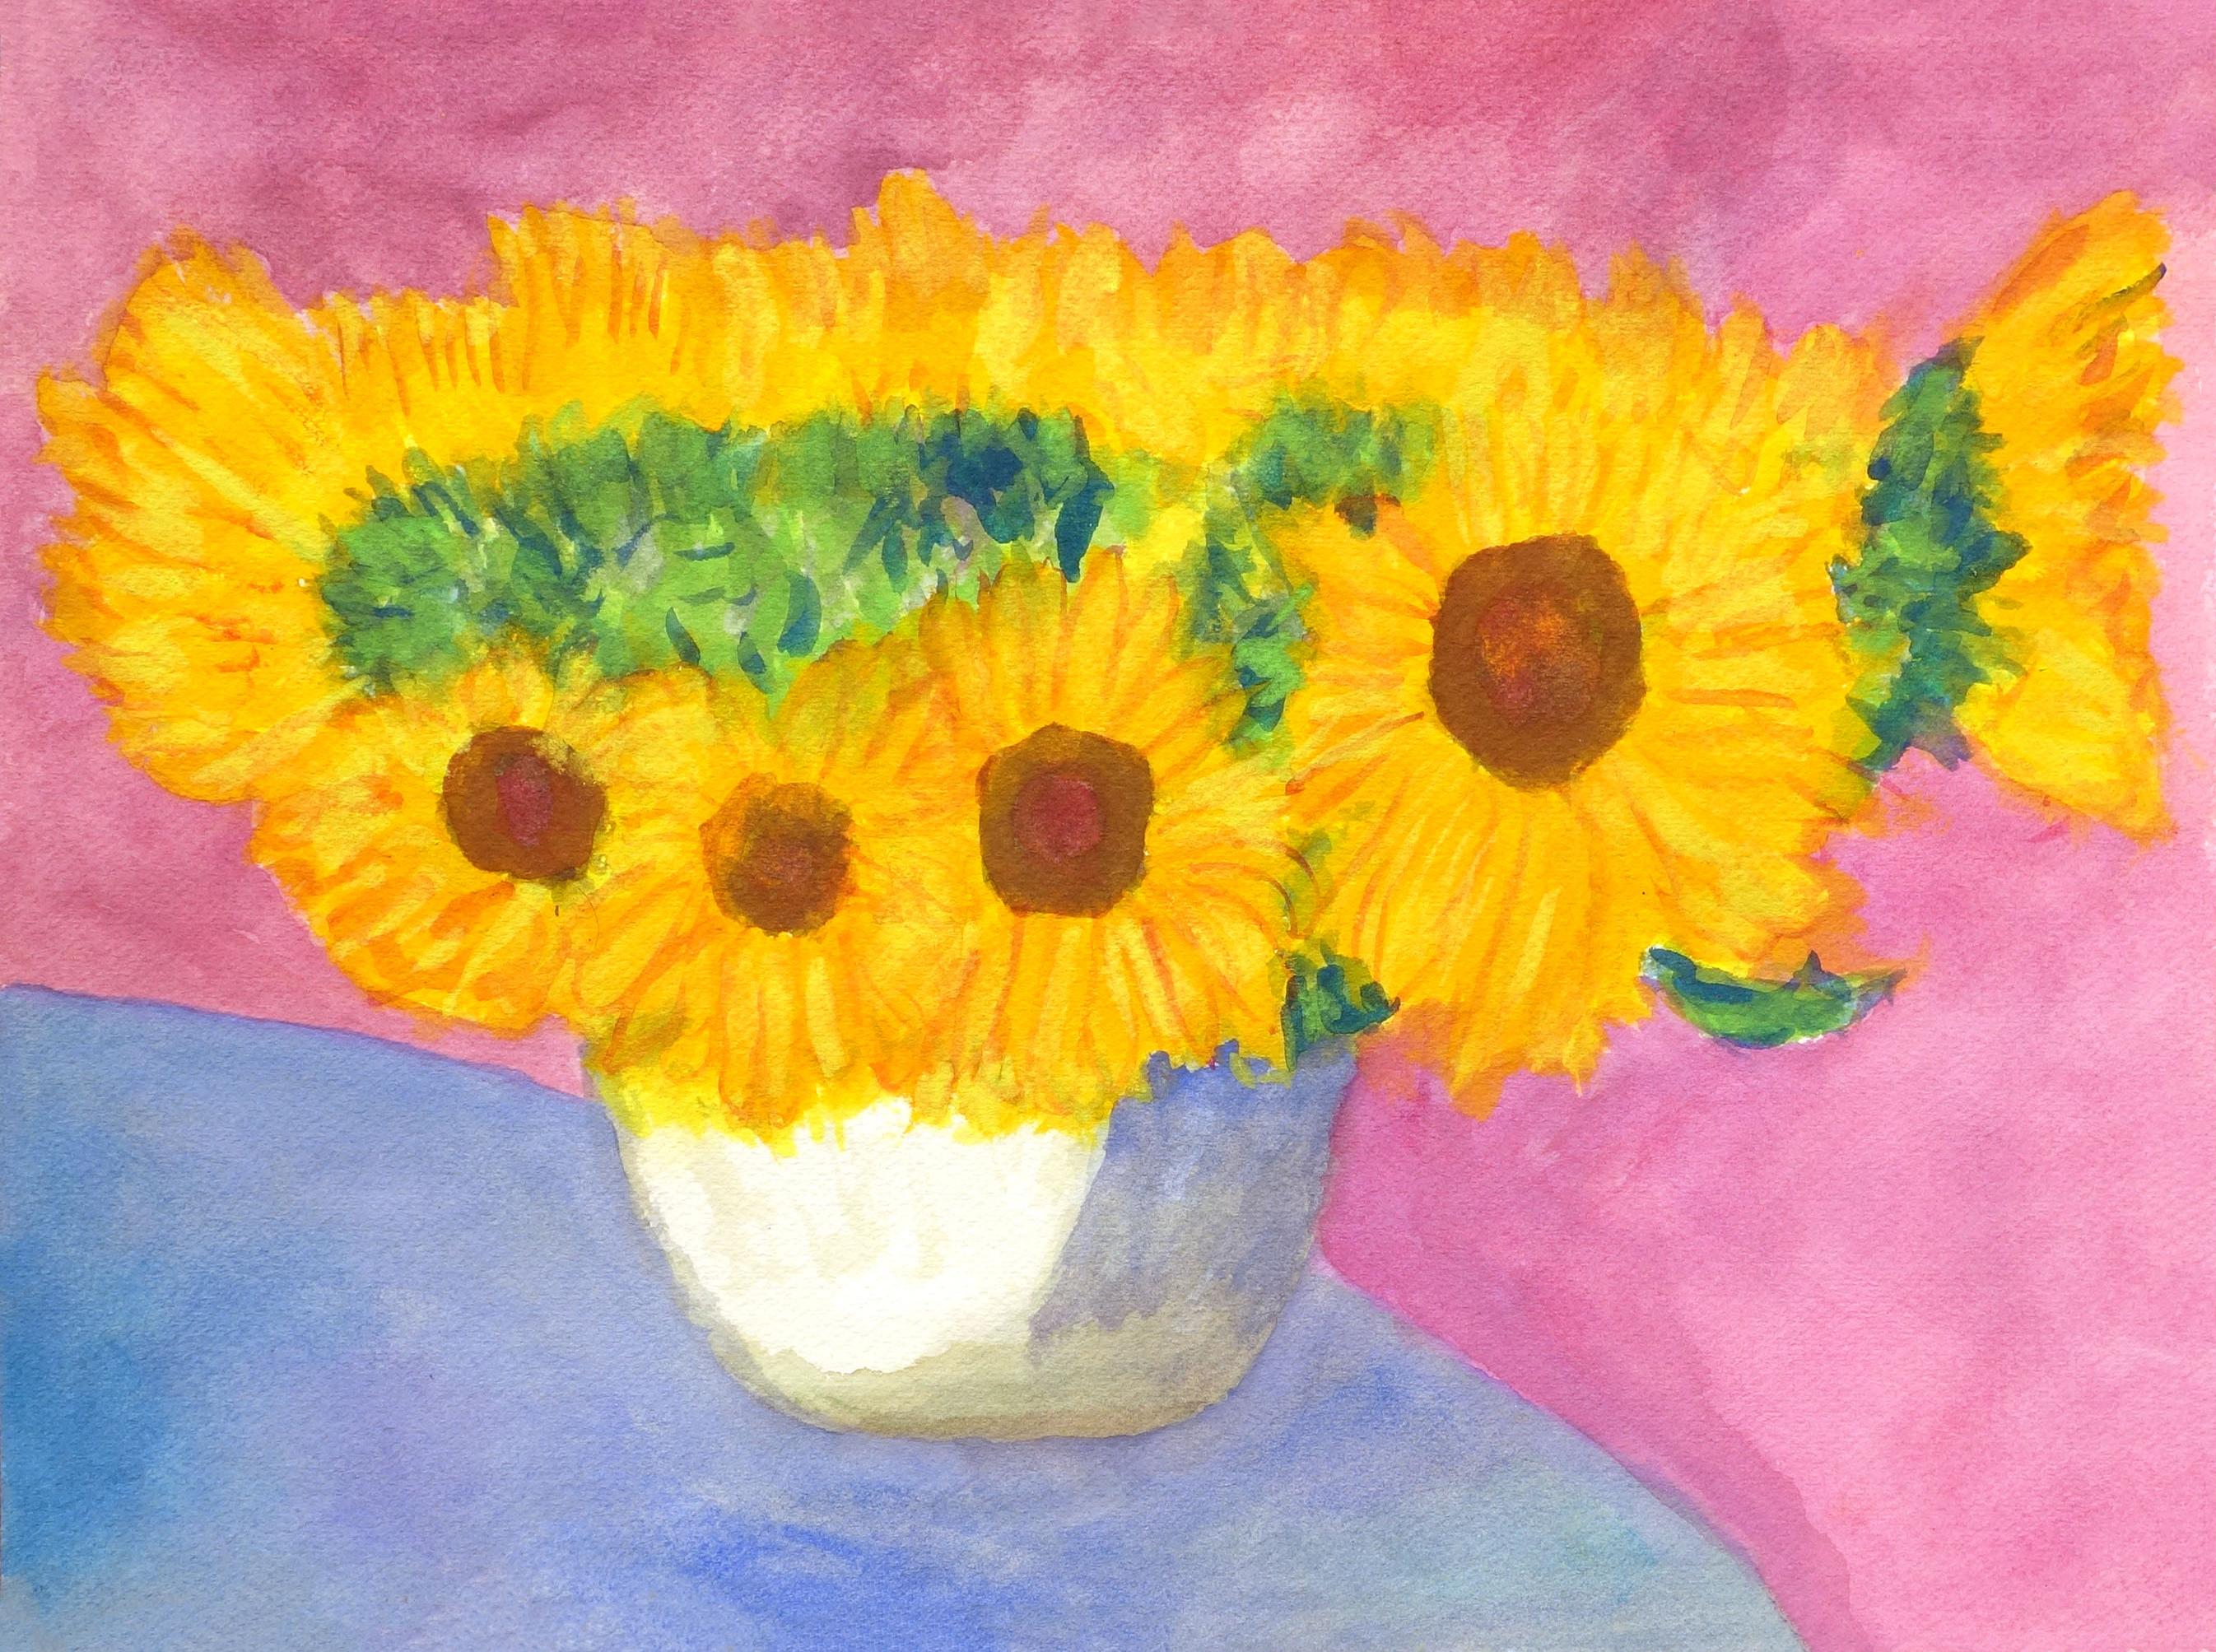 Sunflowers, Hollywood 2018 . Painting From the Still Life Series